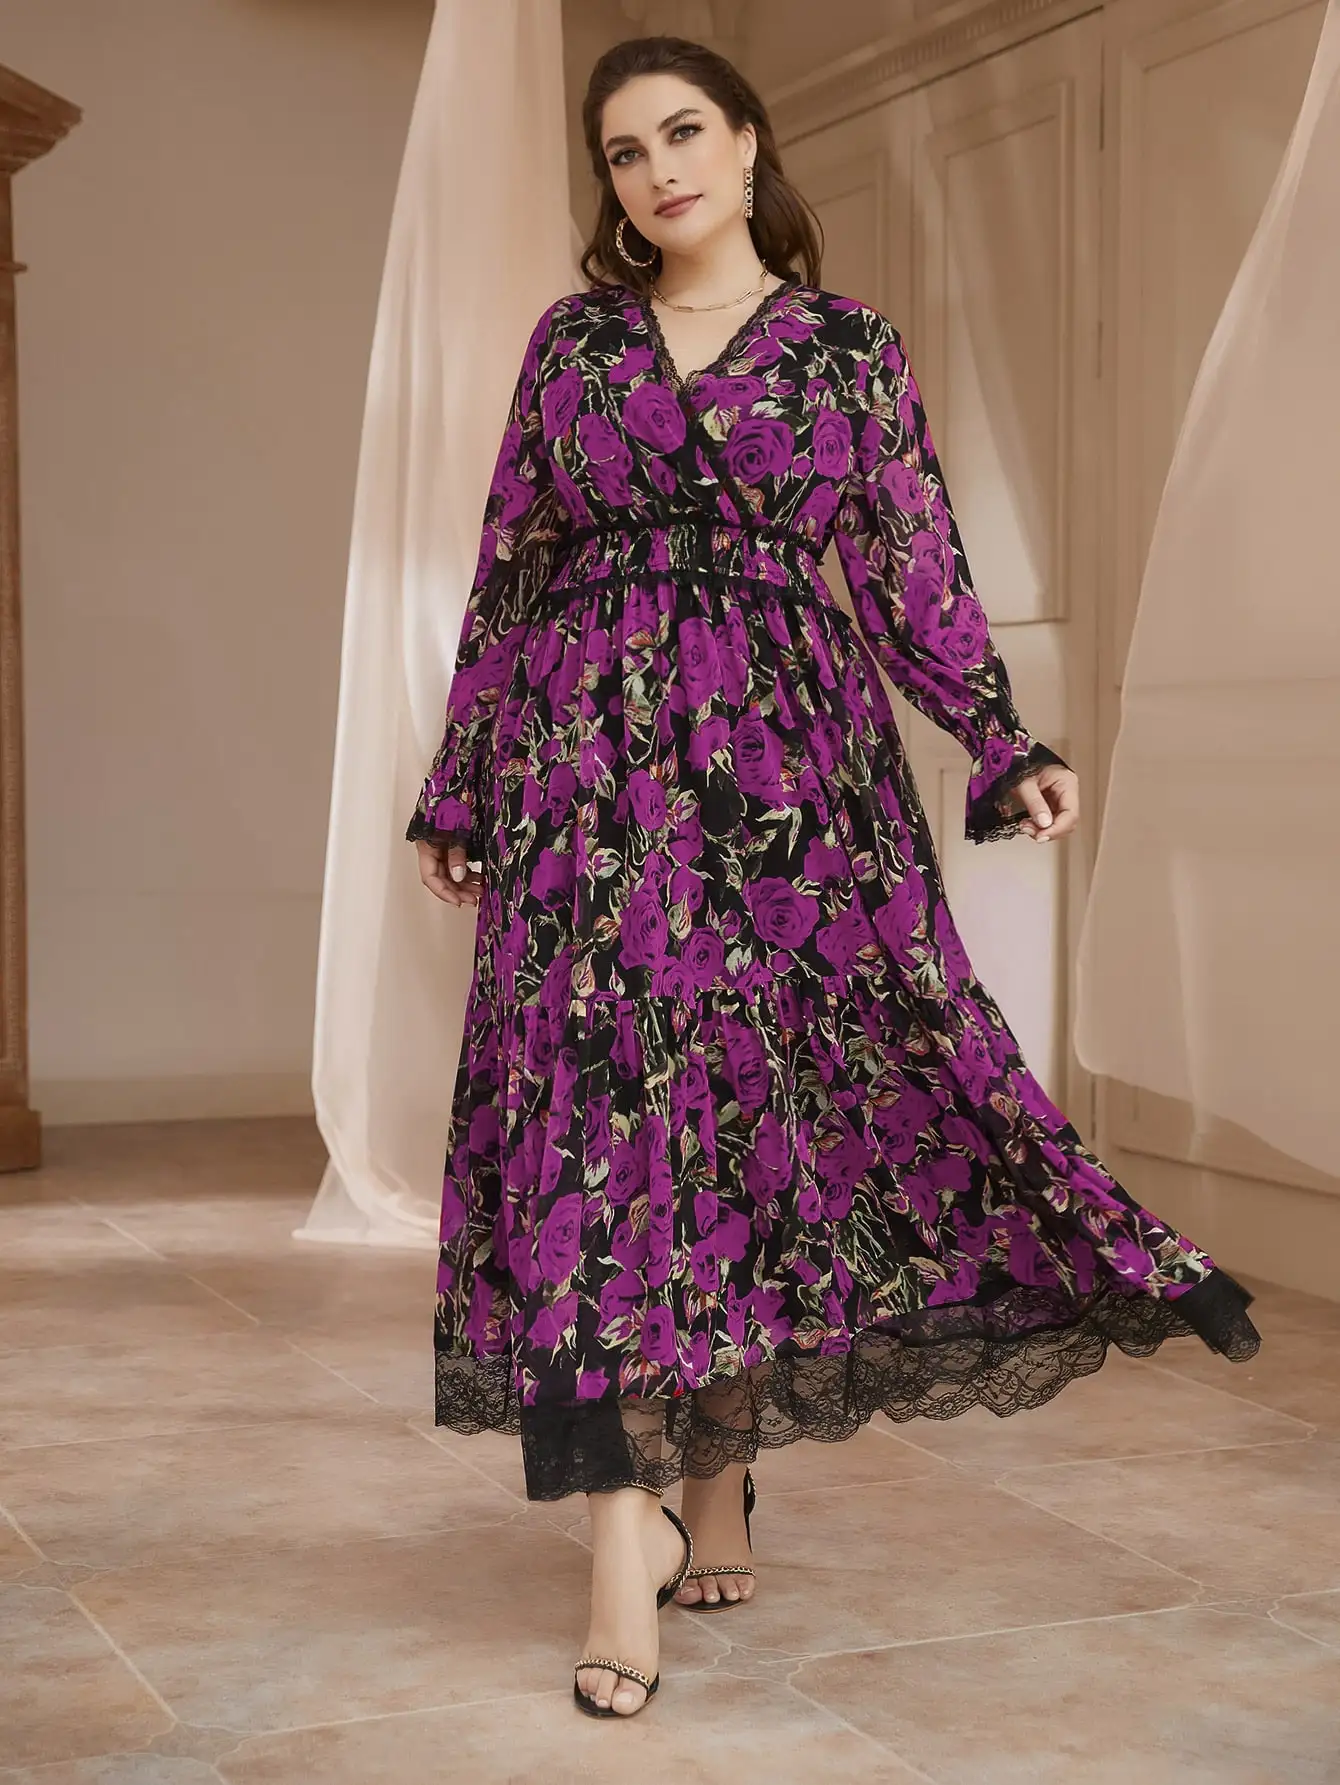 TOLEEN Women Plus Size Maxi Dresses 2022 New Spring Casual Chic Elegant Floral Long Sleeve Turkey Evening Party Wedding Clothing